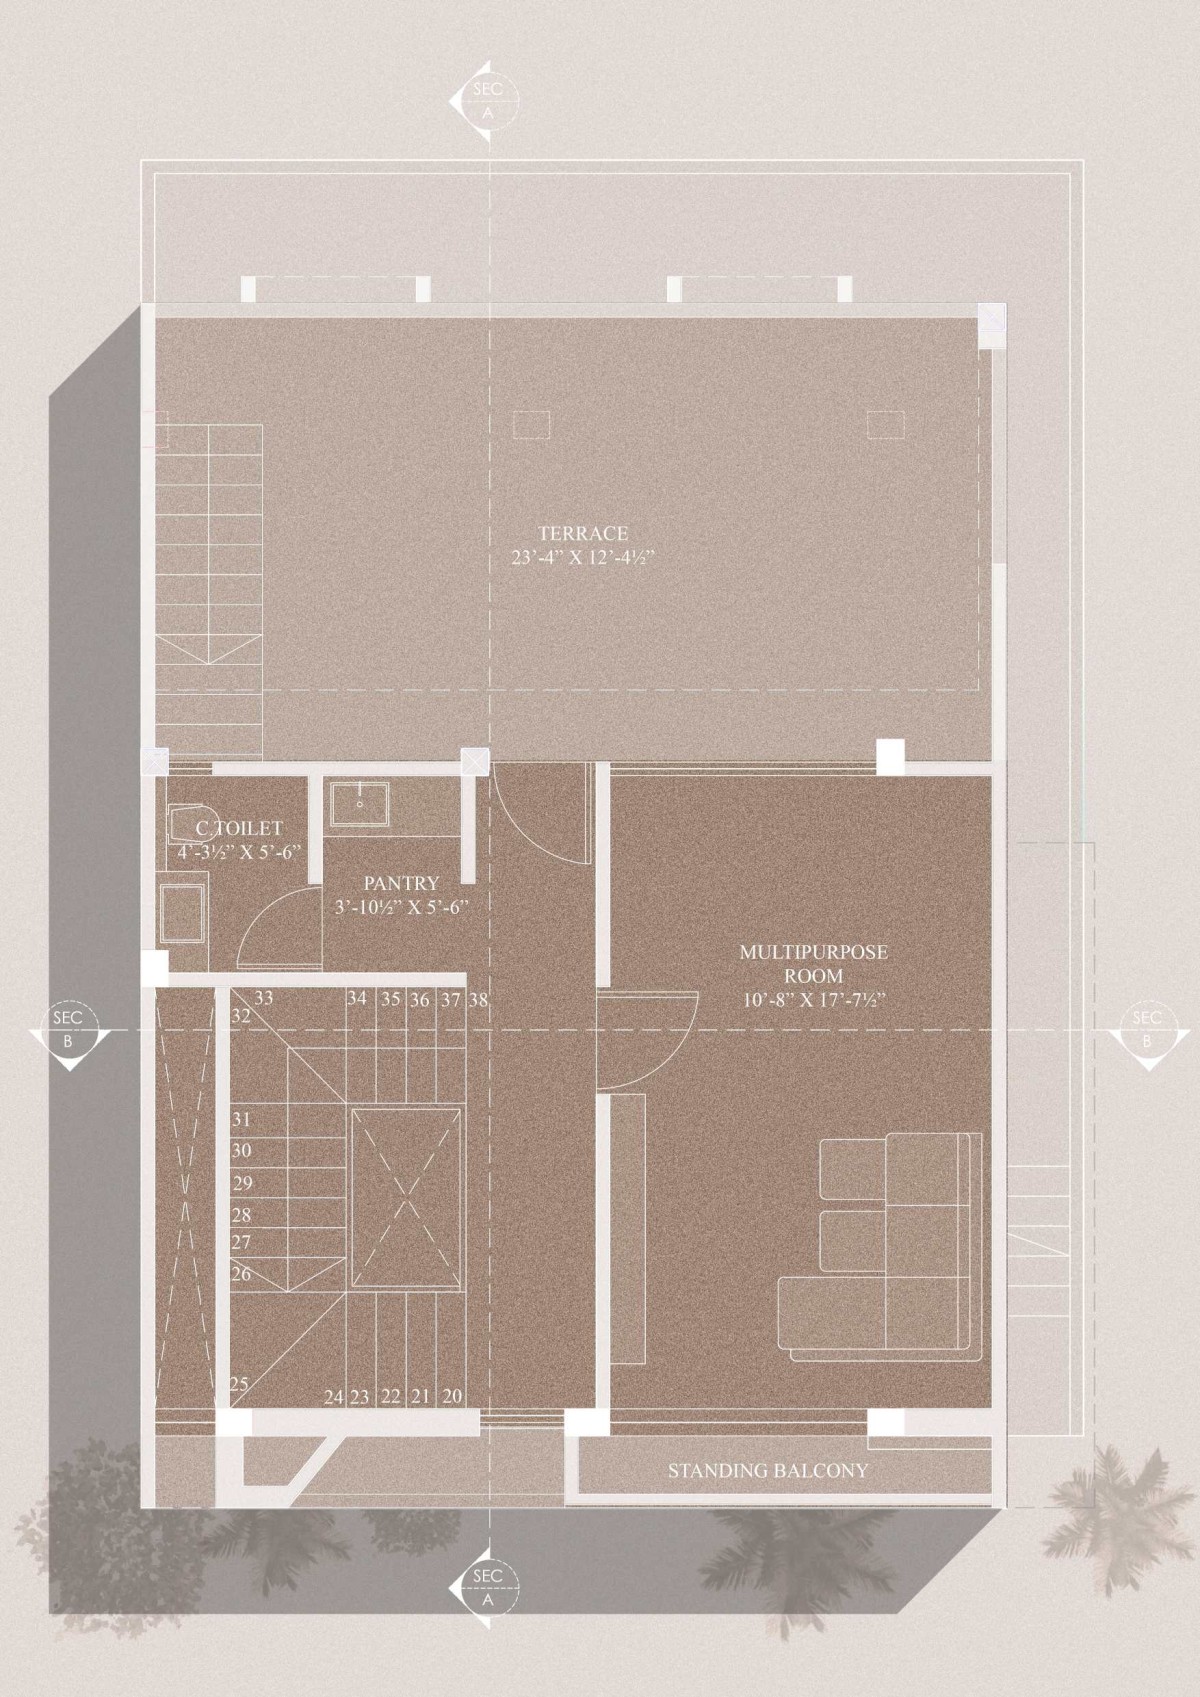 Second floor plan of Parekh's Residence by J Architects